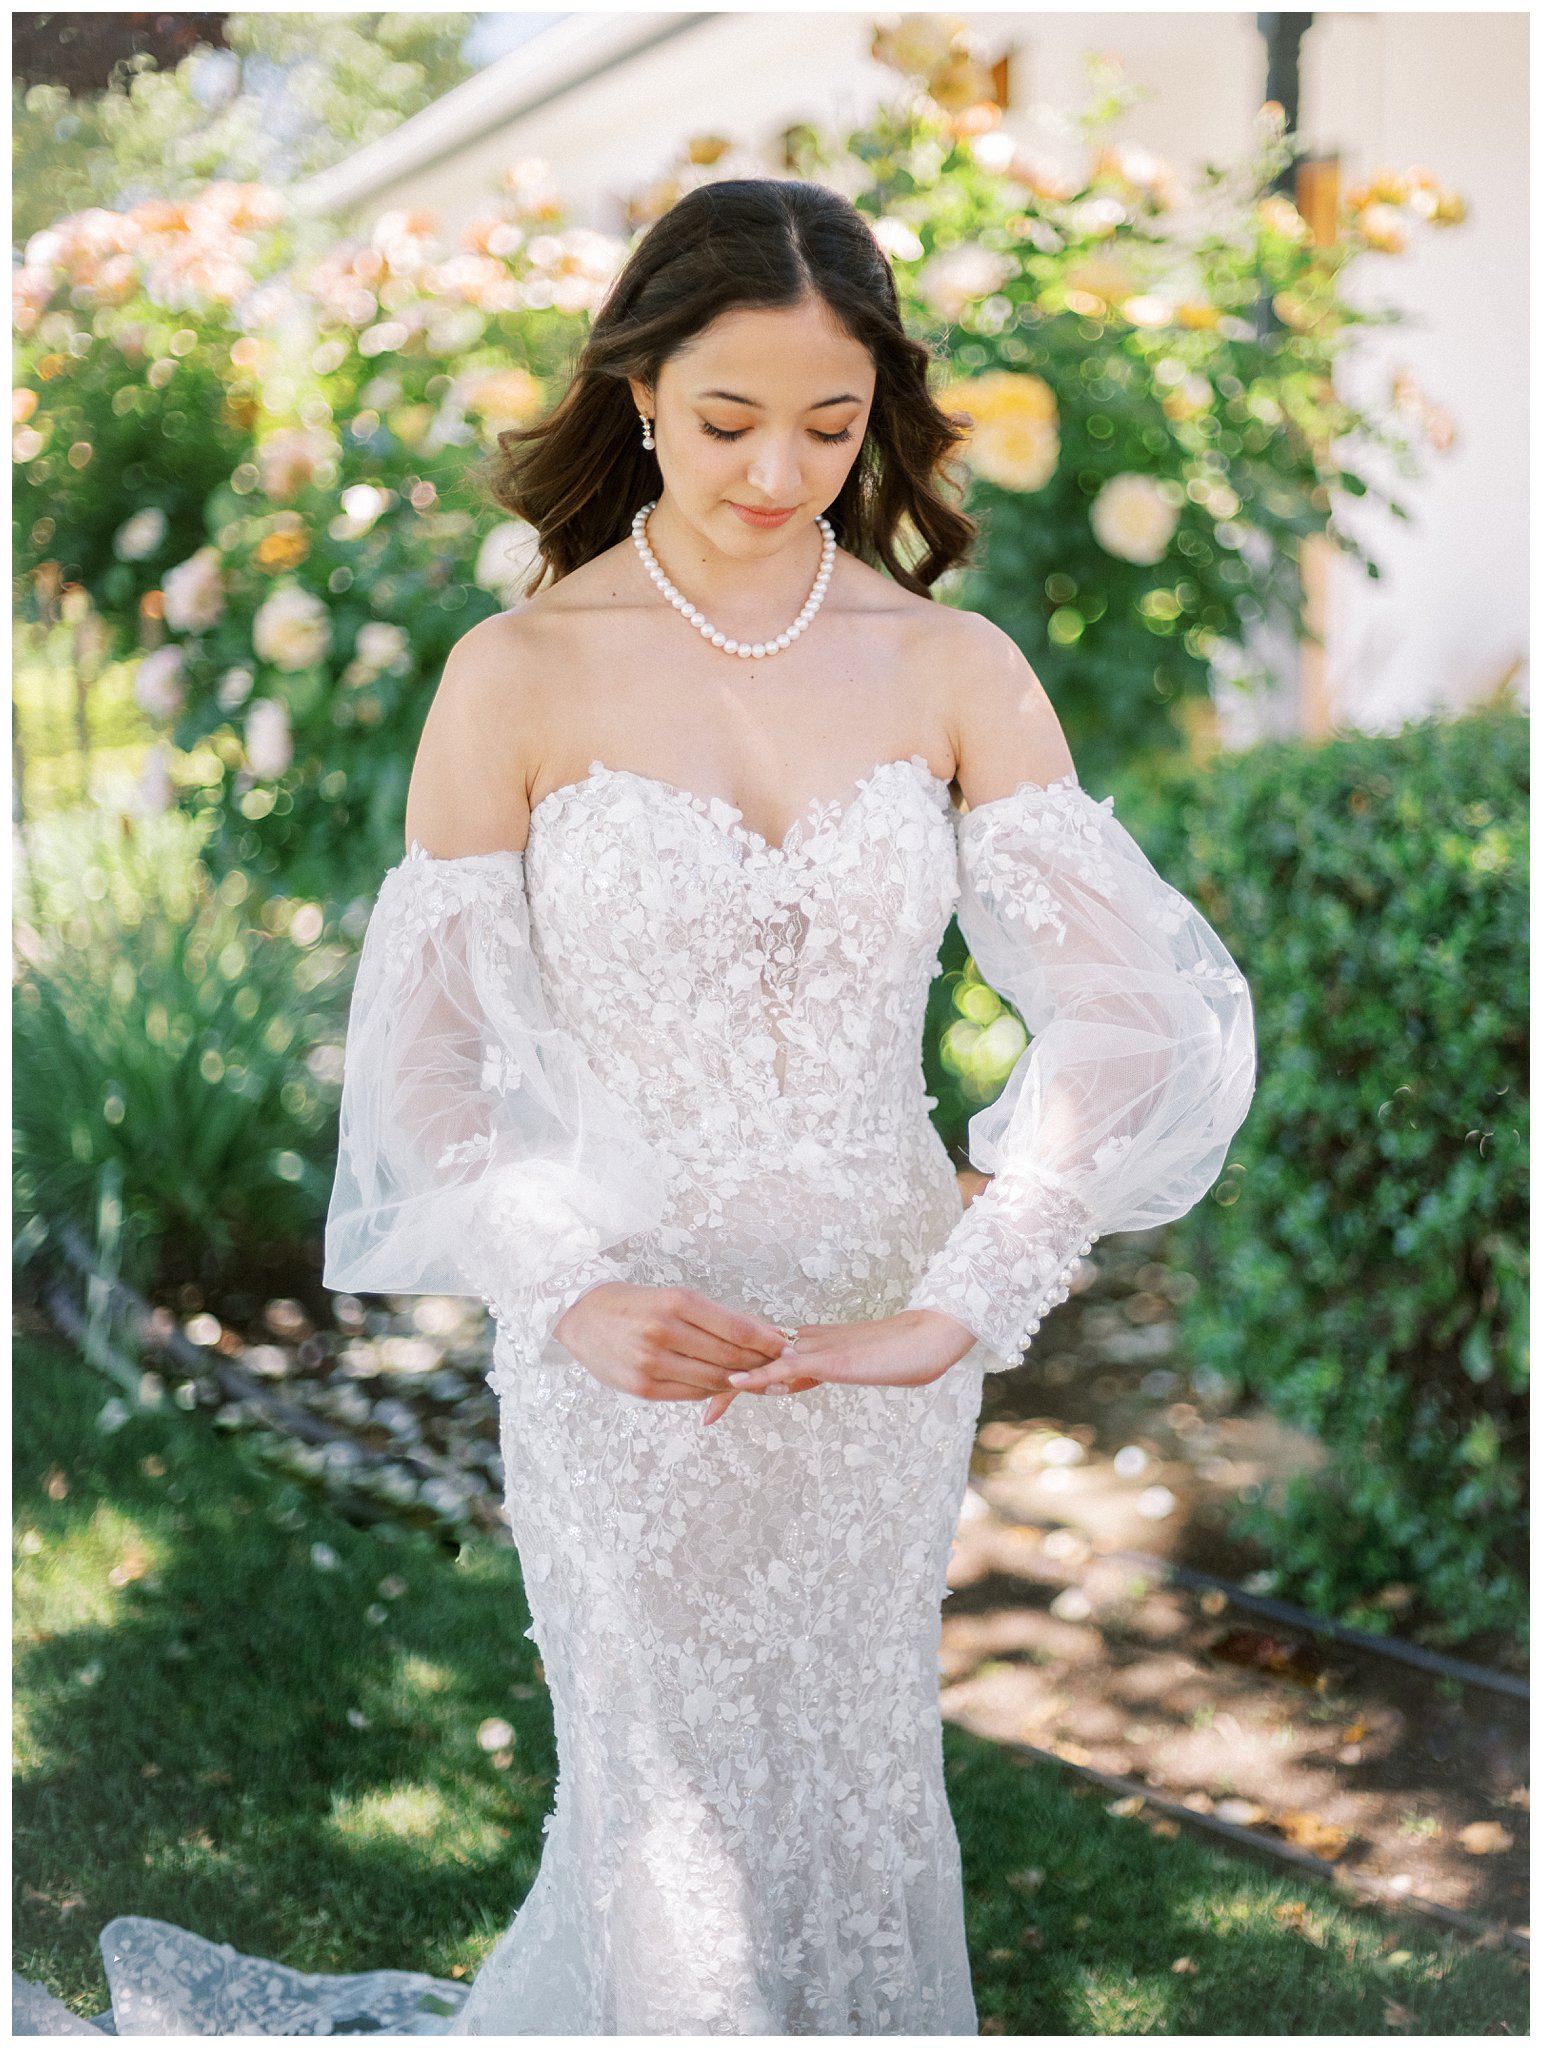 A bride and a classic long sleeved wedding dress dress stand in front of the roses at the Matt house at Bella Terra Vineyards in Paso Robles during her classic Vineyard wedding day.